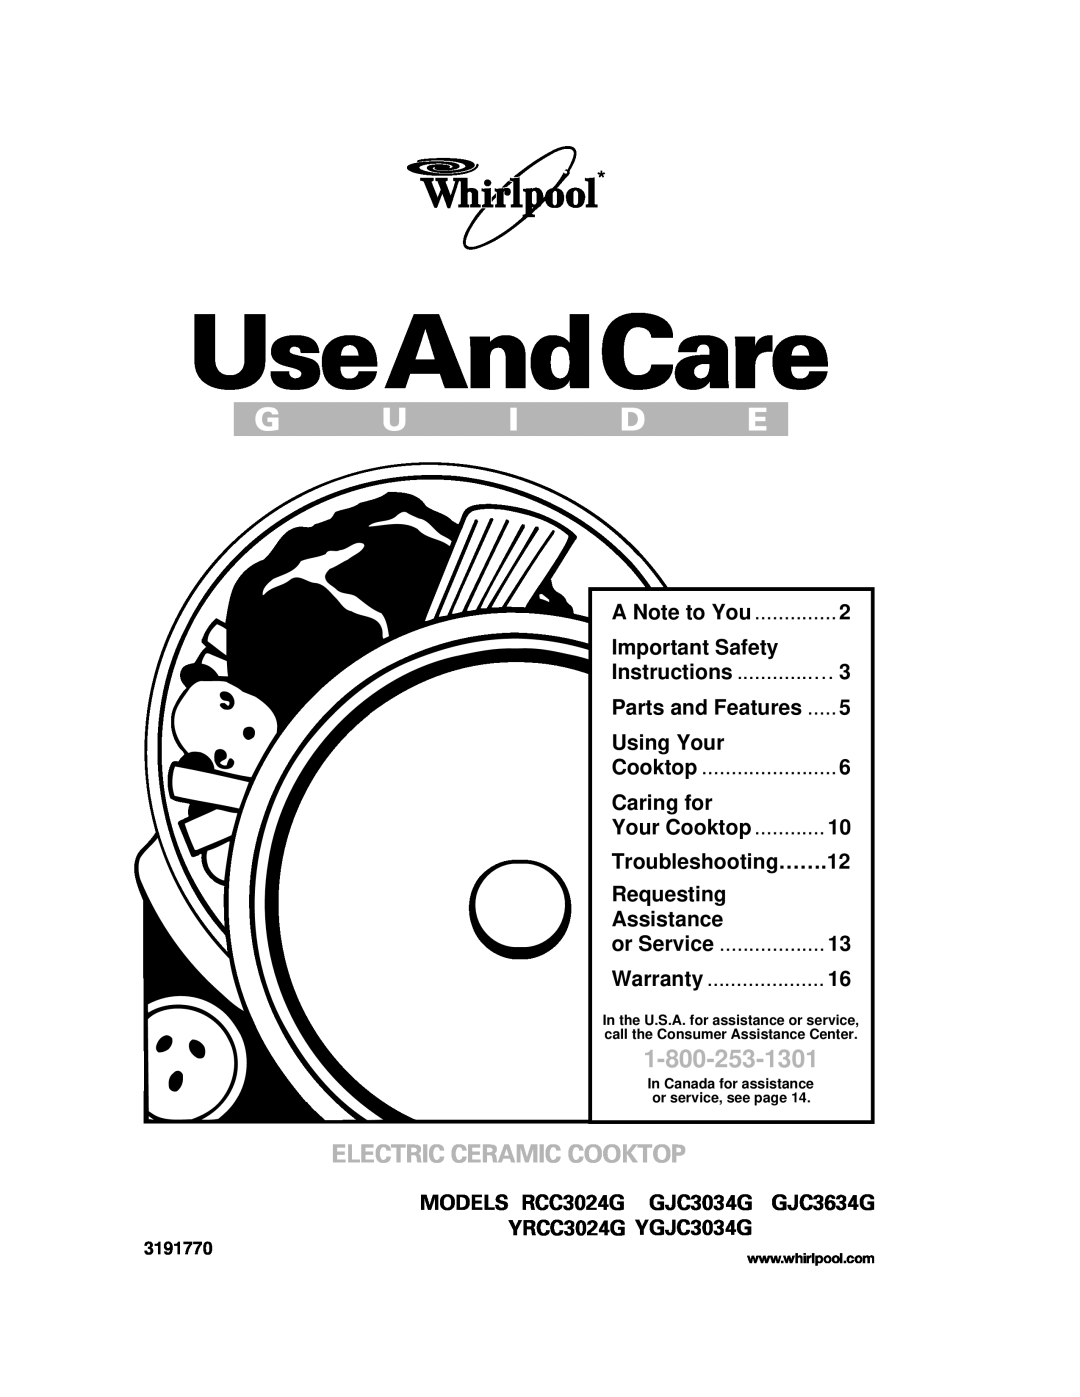 Whirlpool GJC3634G, RCC3024G, GJC3034G important safety instructions G U I D E, Electric Ceramic Cooktop, UseAndCare 